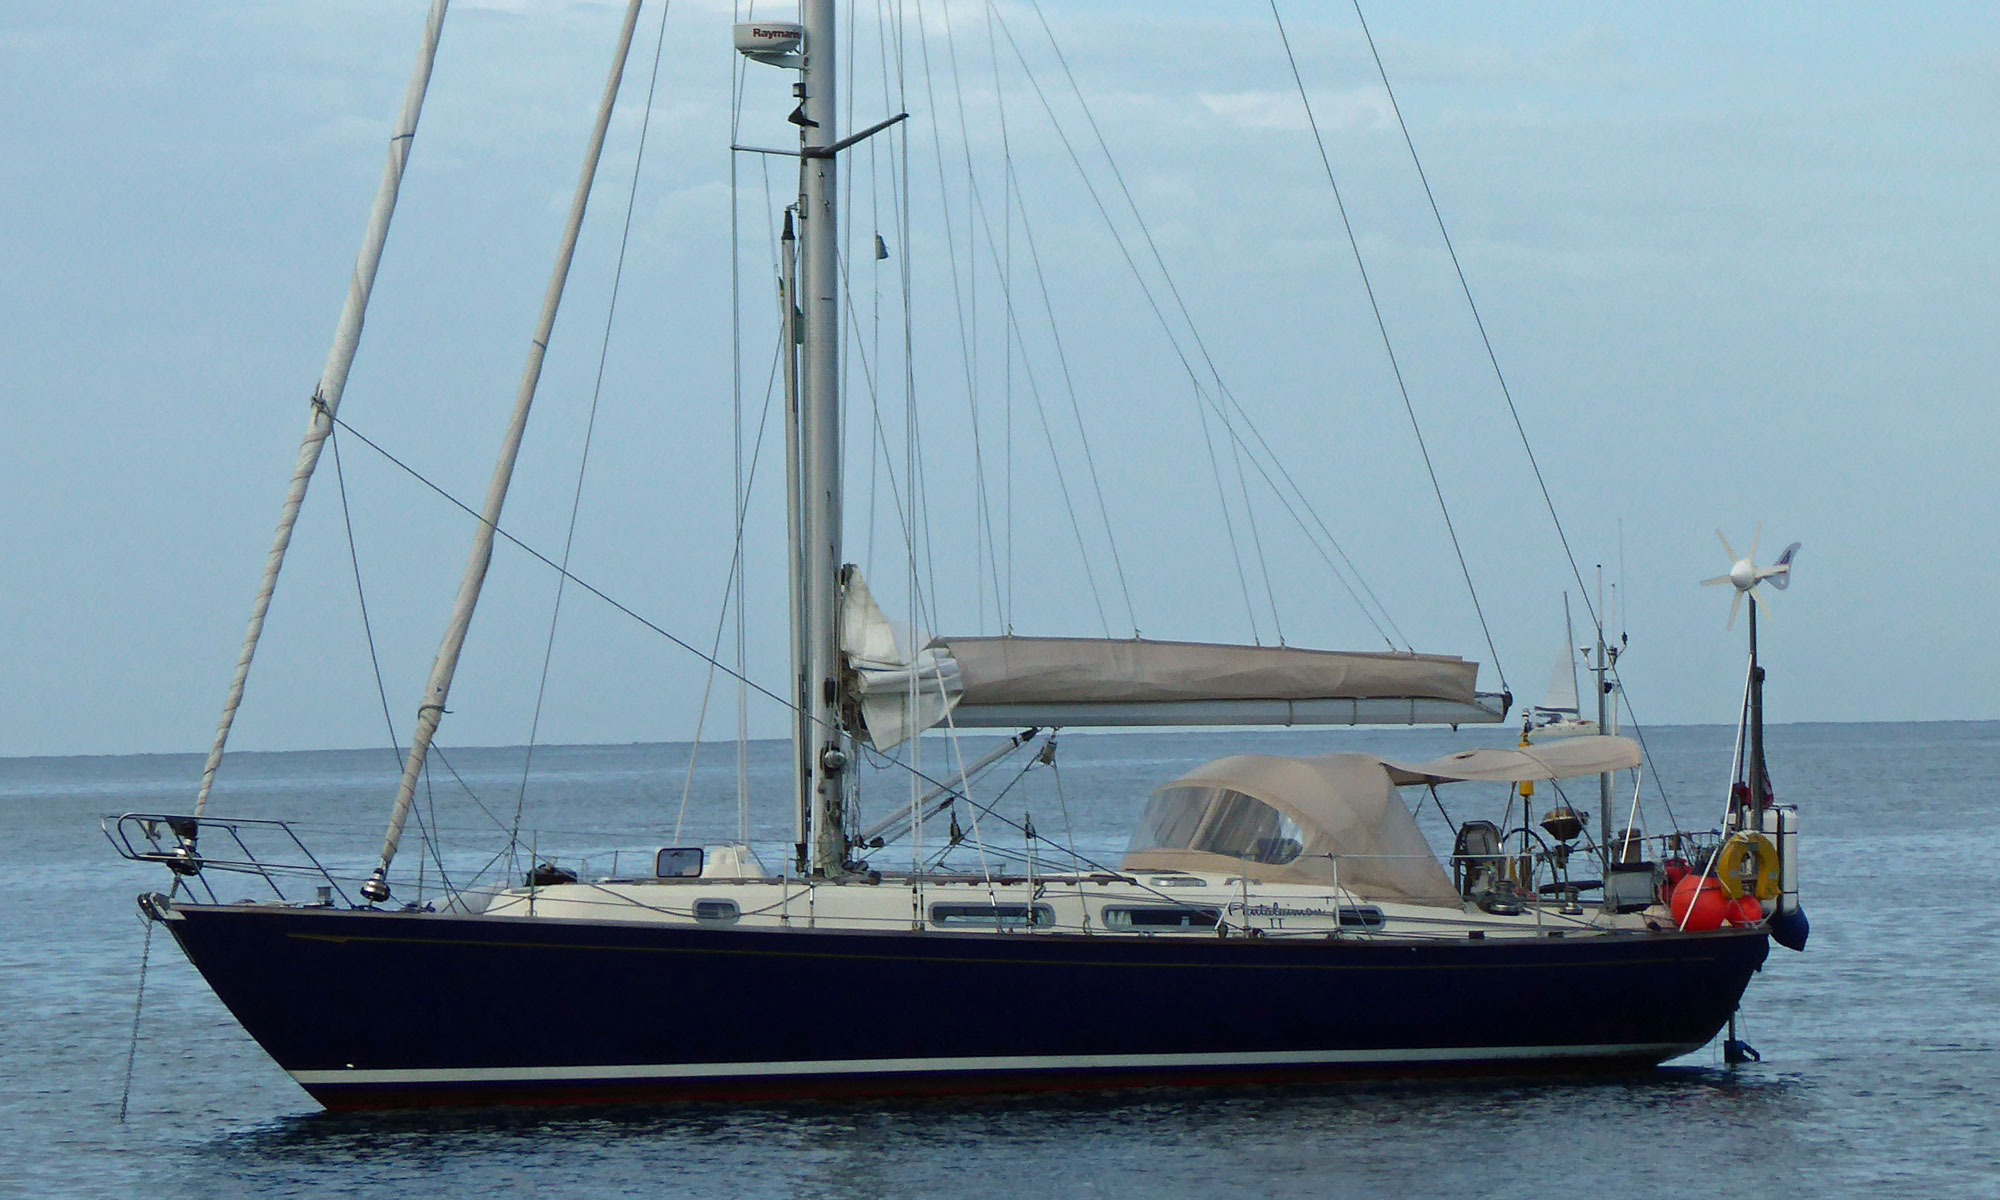 Blue water sailboats are capable offshore cruising sailboats that have been properly equipped and set-up for long-distance ocean sailing, as in the typical example outlined here